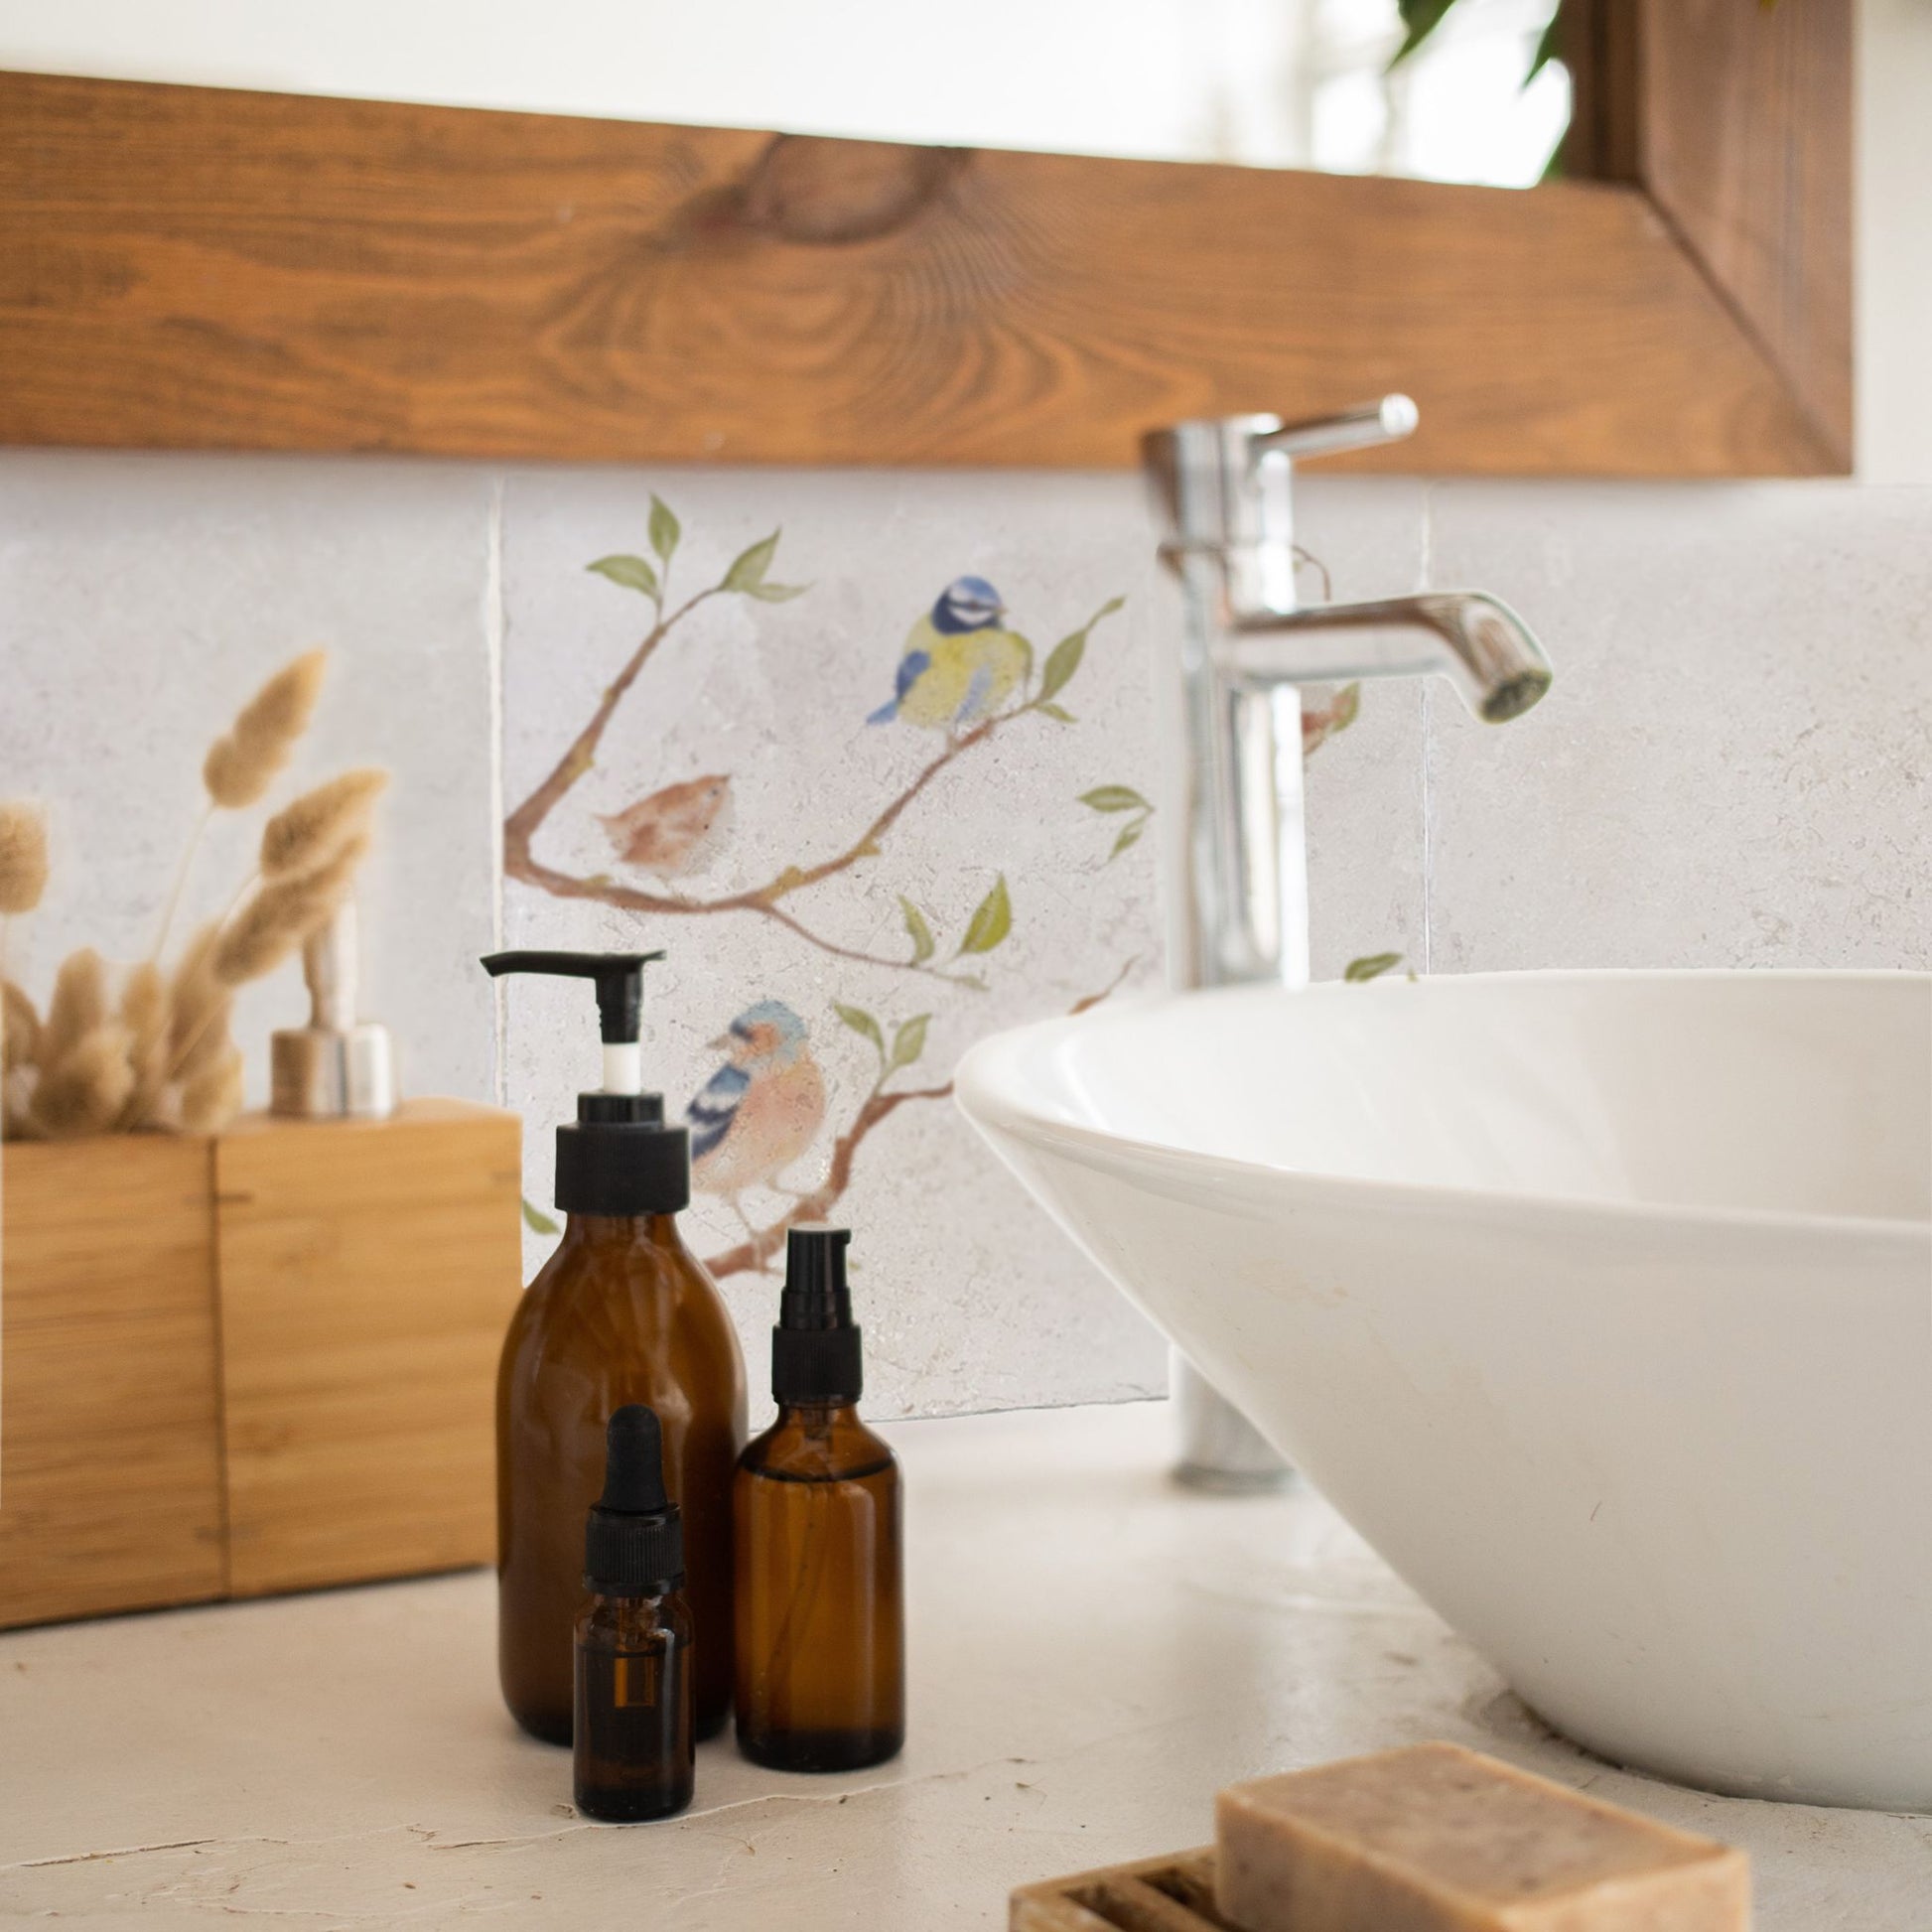 A tiled splashback behind a bathroom sink. The splashback is made up of plain cream square marble tiles alternated with tiles featuring countryside scenes including British garden birds on branches.